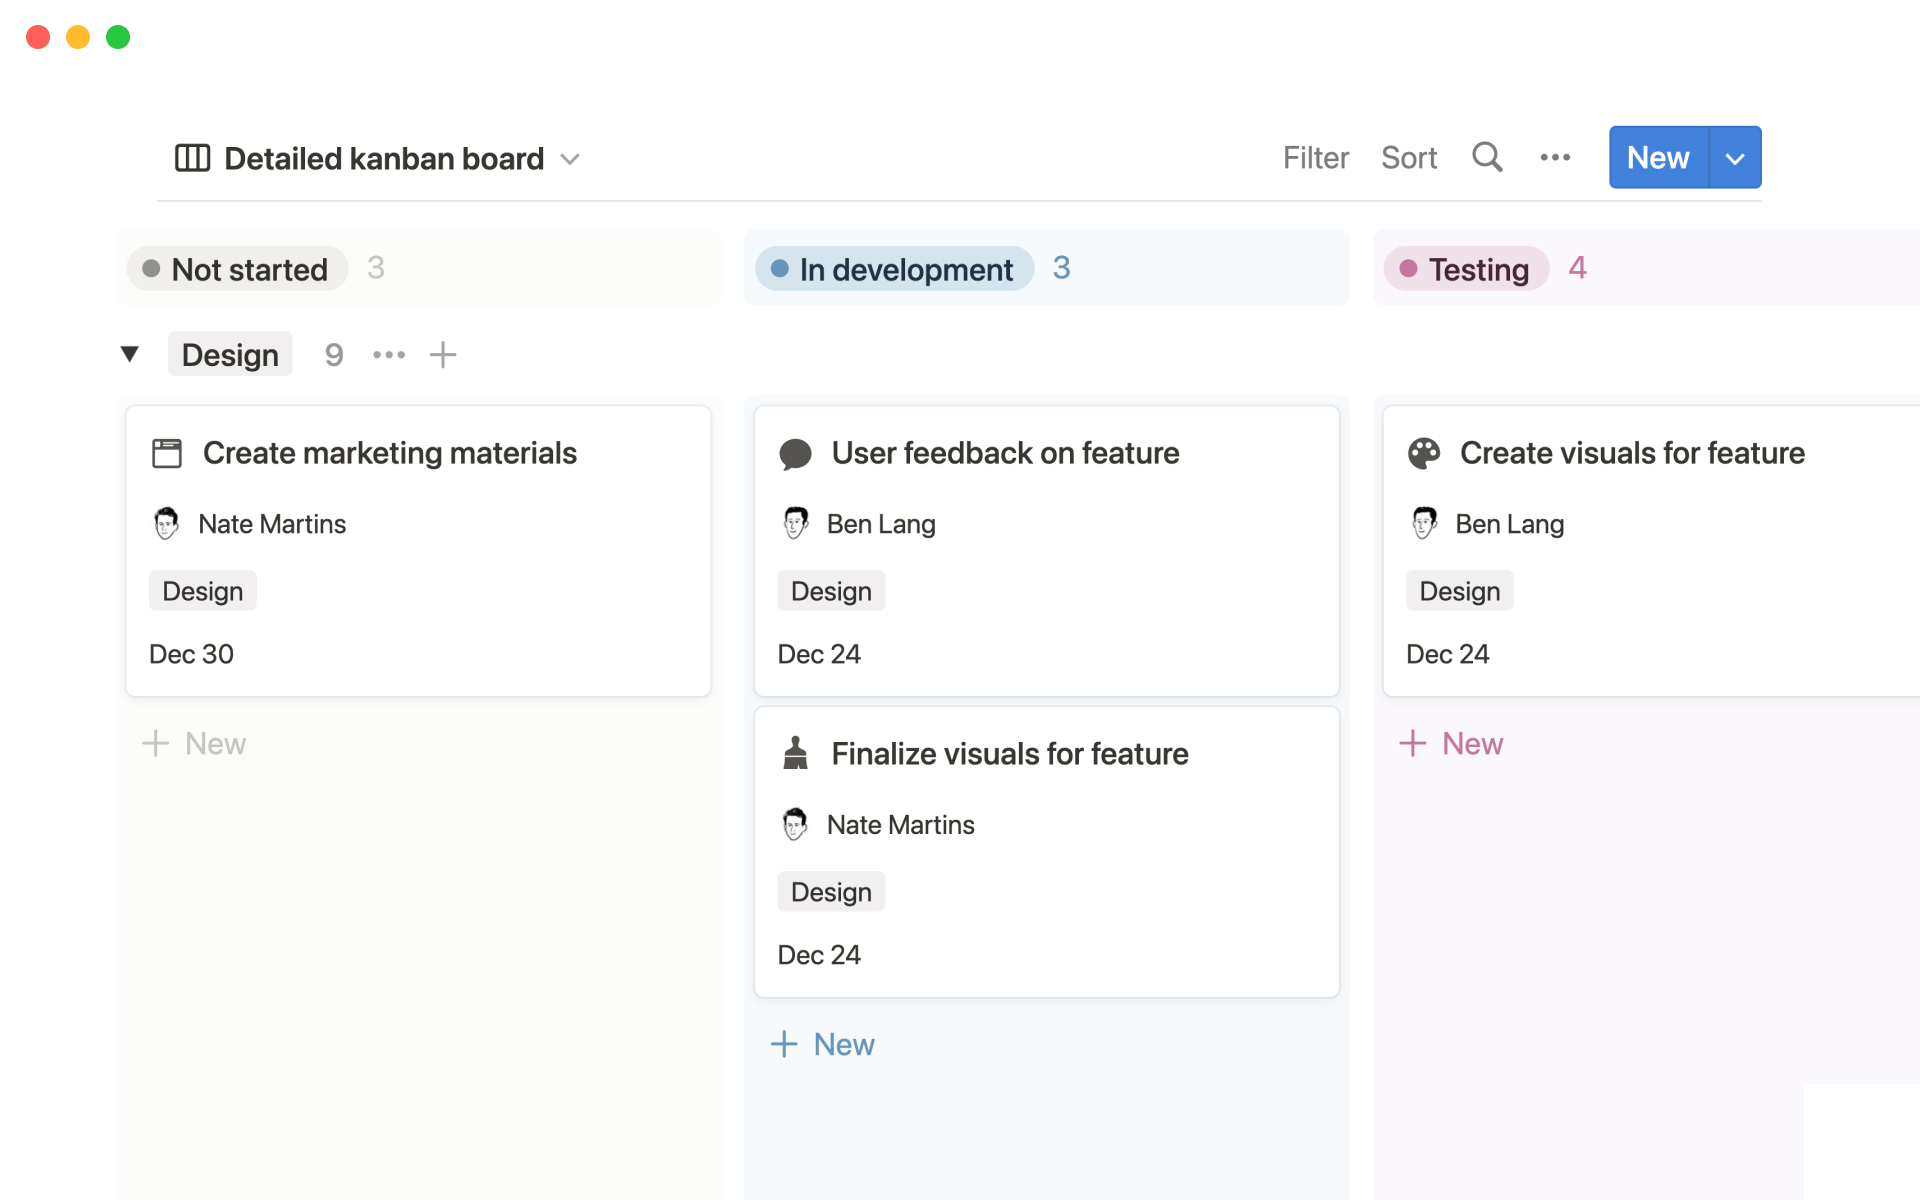 Helps design and engineering teams to organize and manage their projects and tasks.